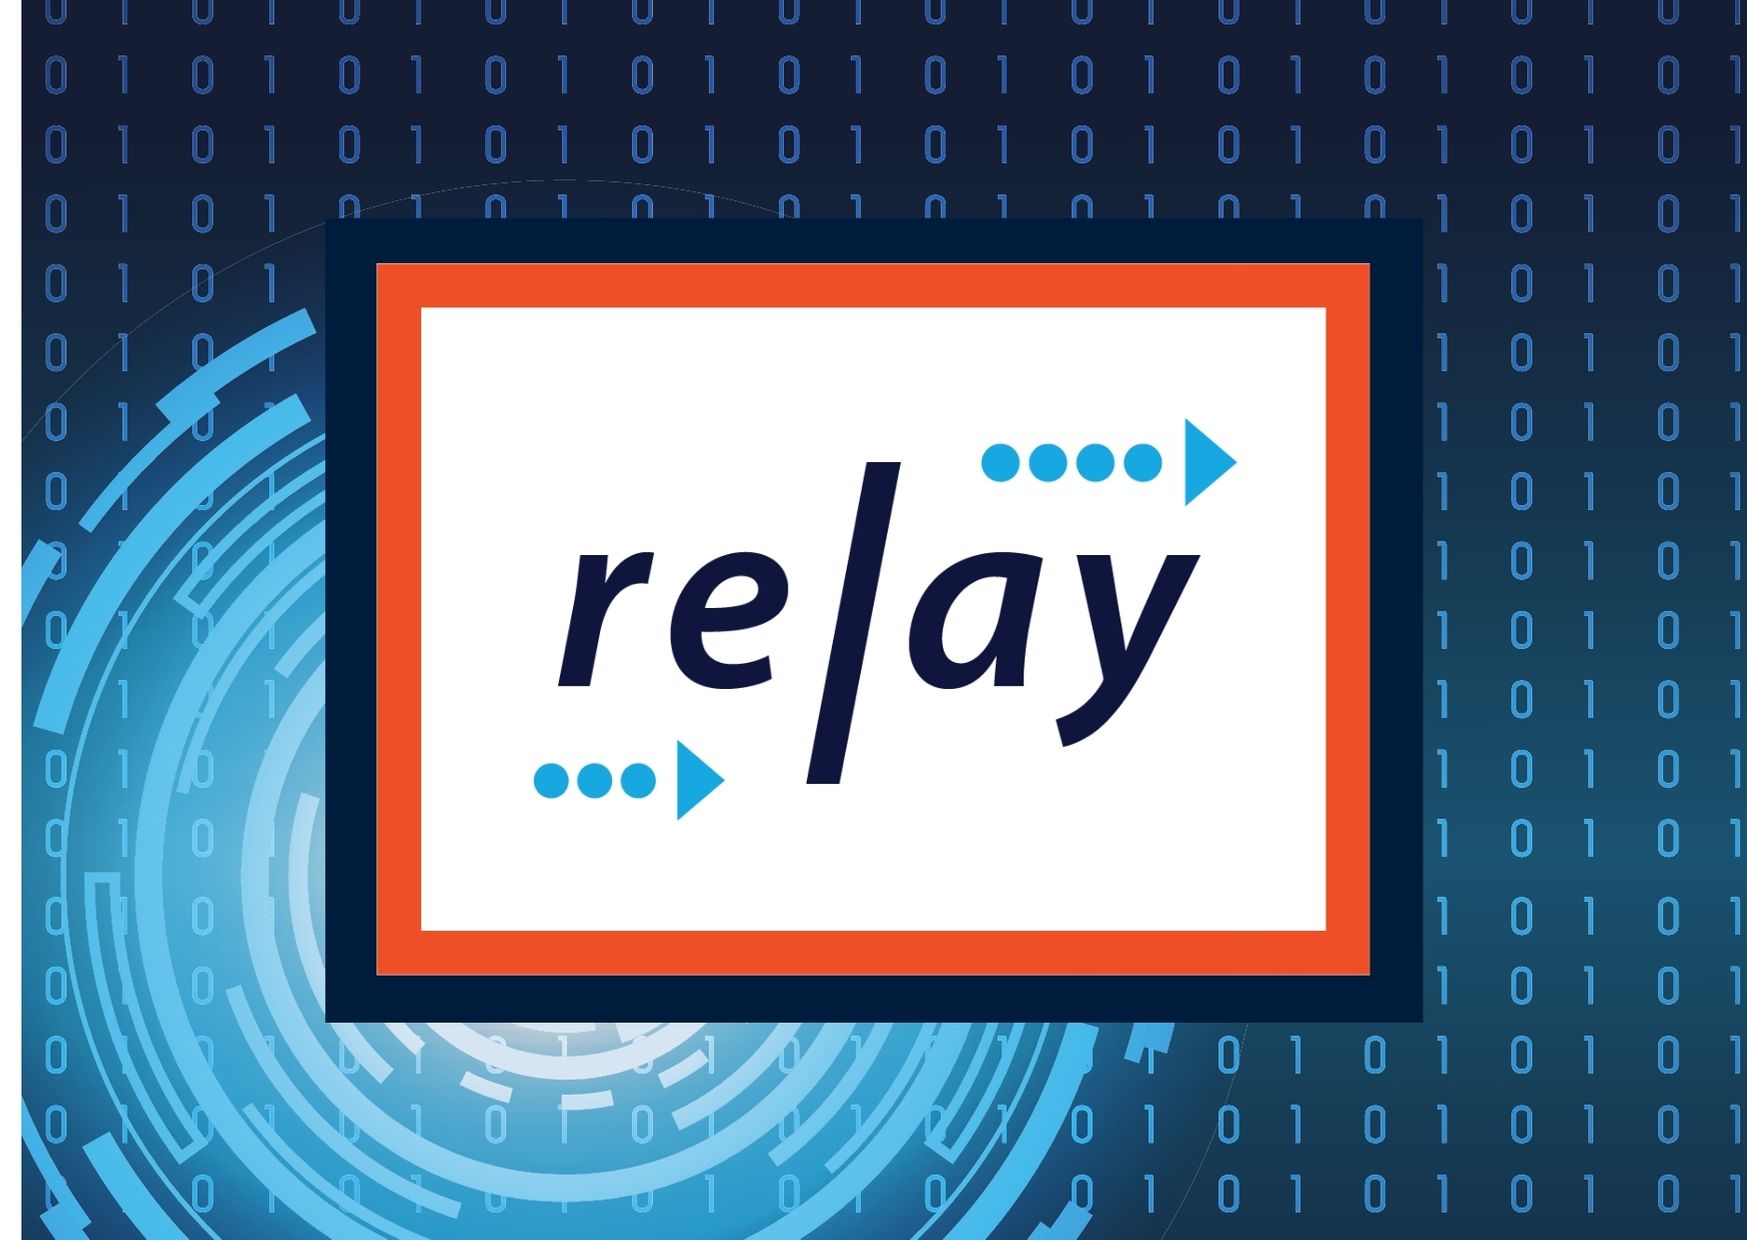 RELAY logo for BISS event 